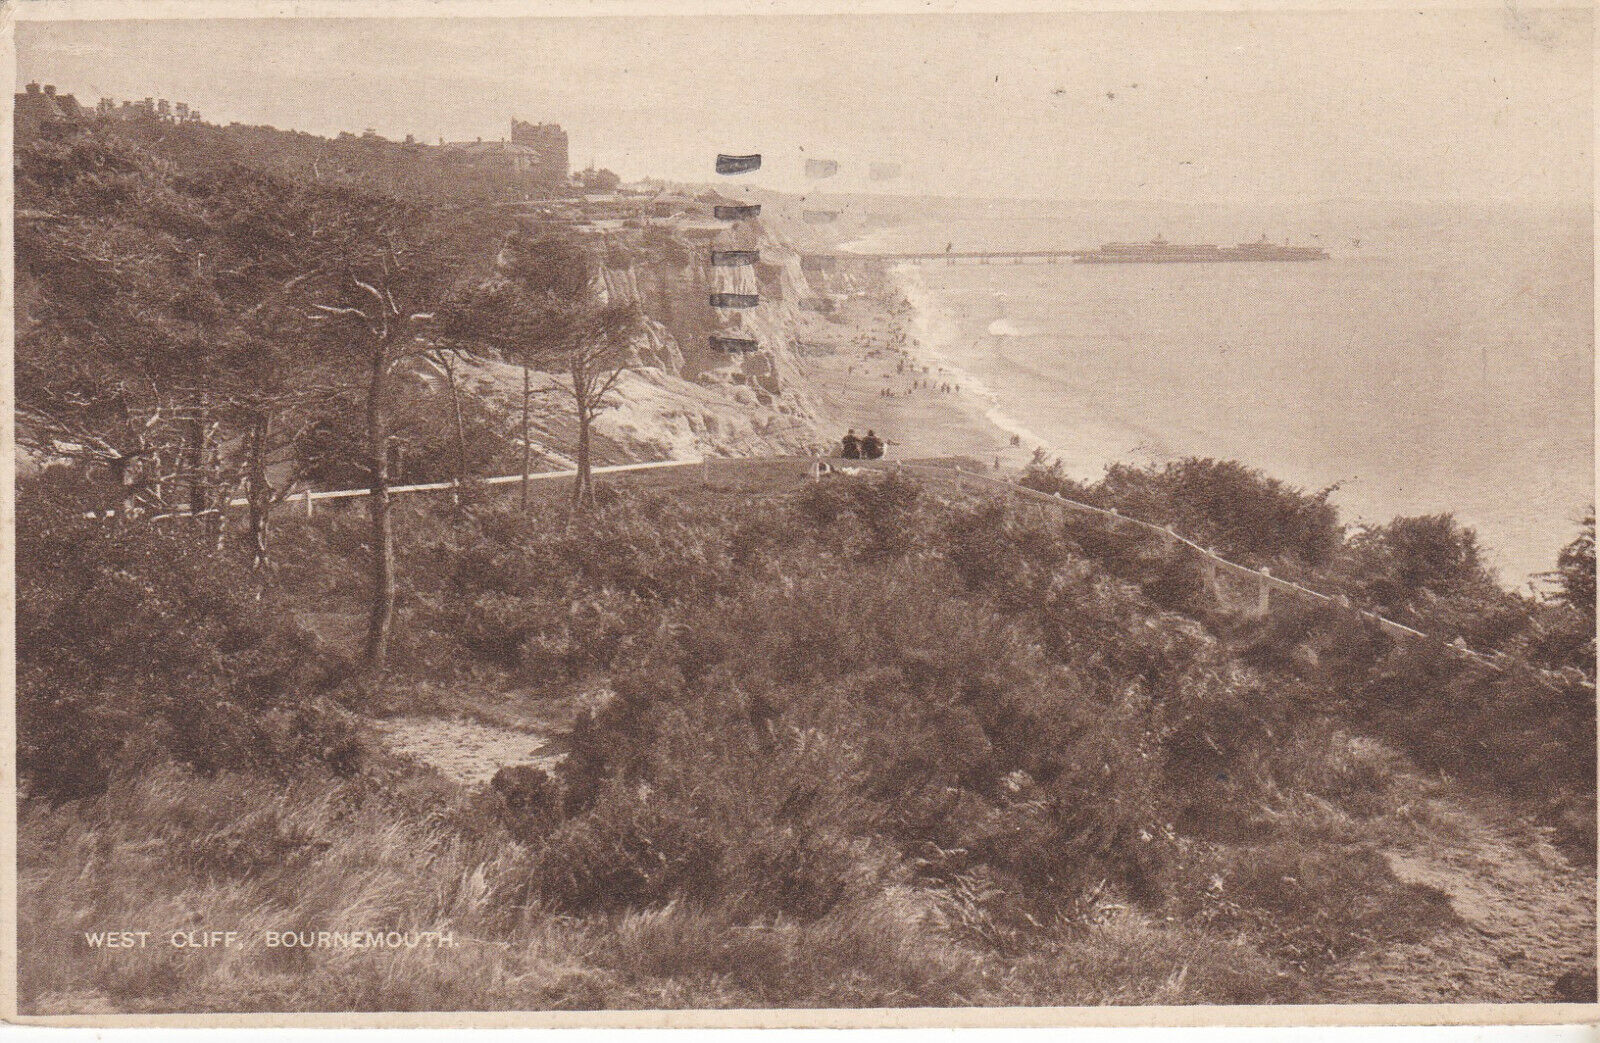  CPA WEST CLIFF BOURNEMOUTH 